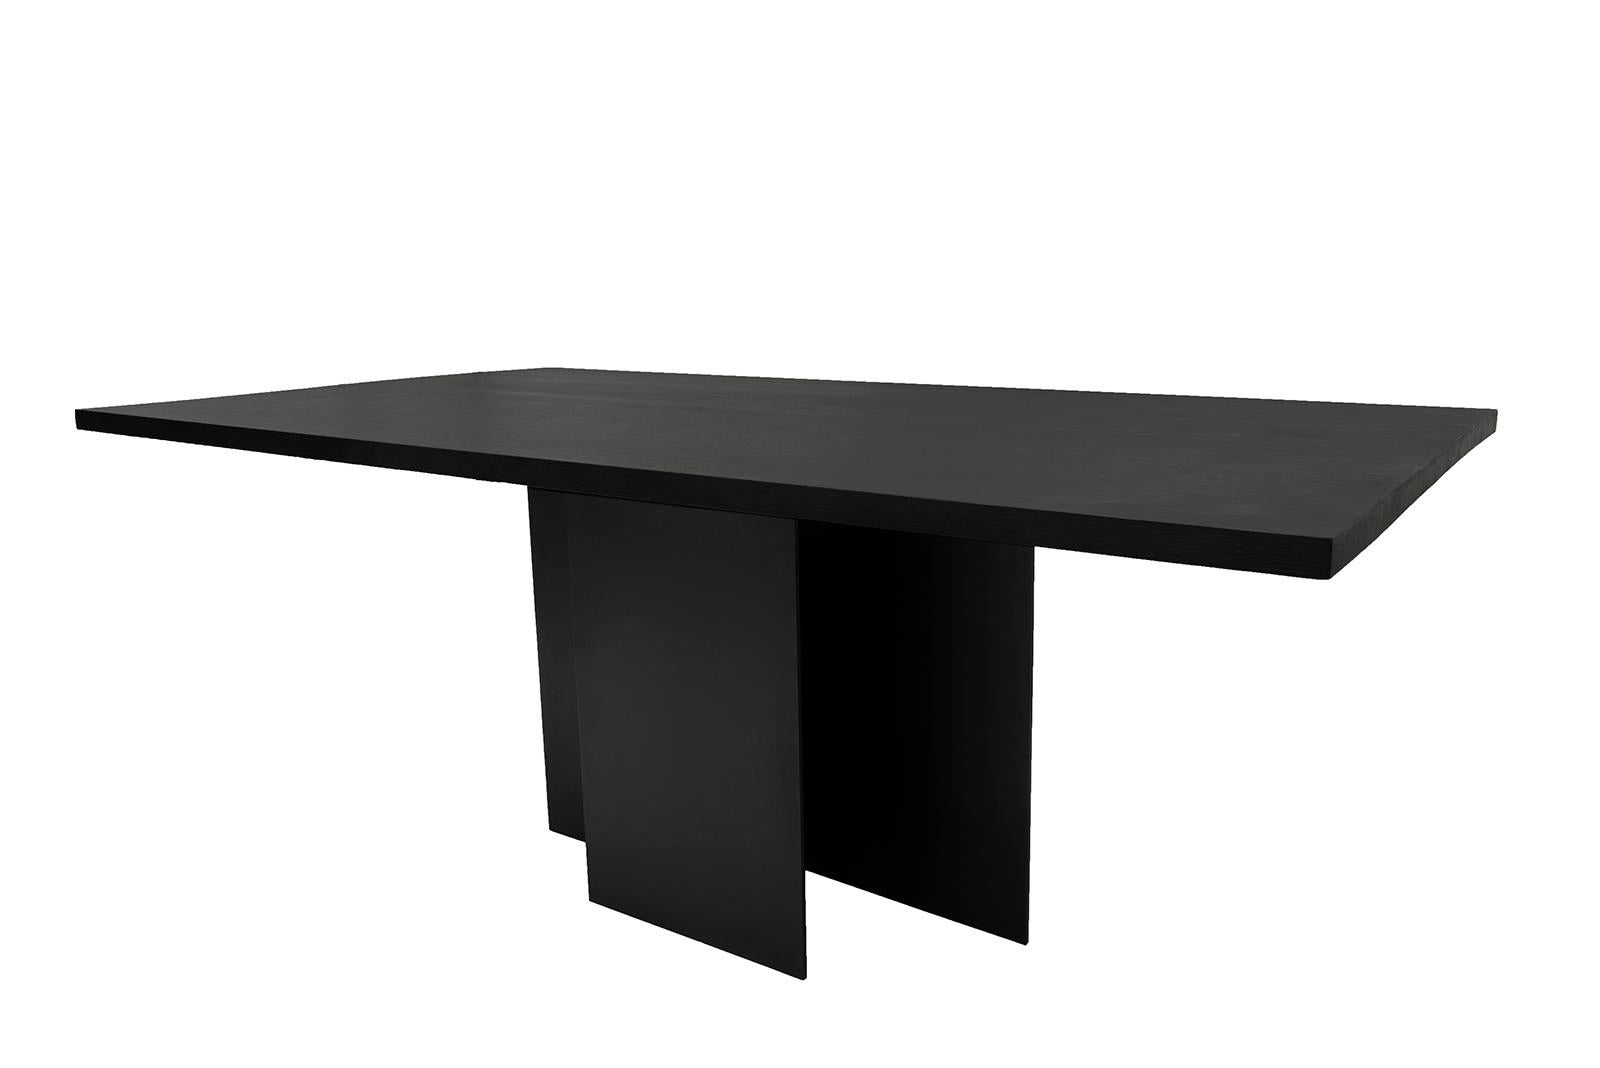 Polish Object 056 Table by NG Design